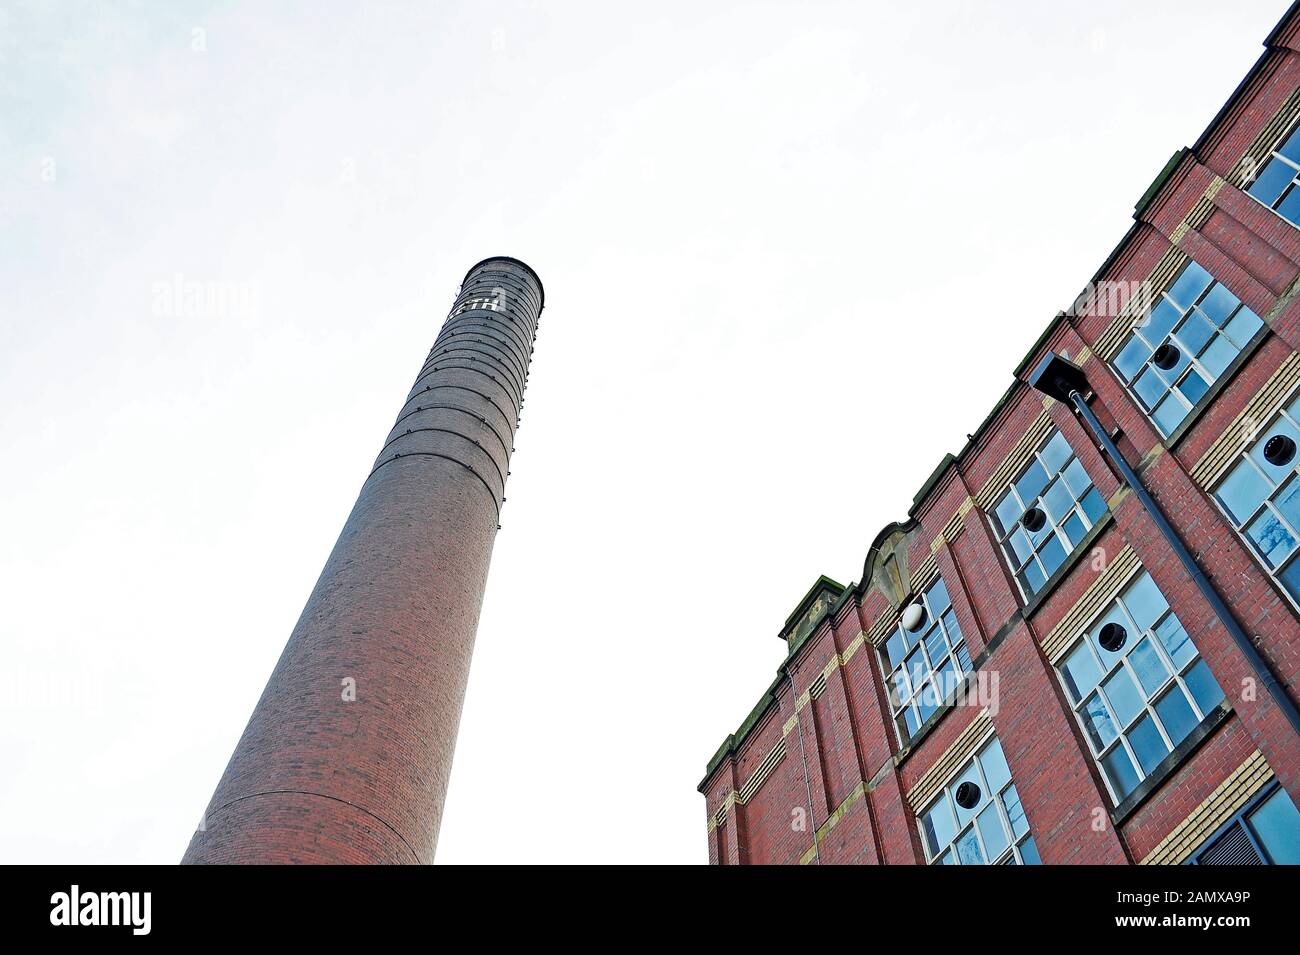 Tulketh Mill and chimney,former cotton spinning mill currently Carphone Warehouse call centre built 1905,Preston,UK Stock Photo